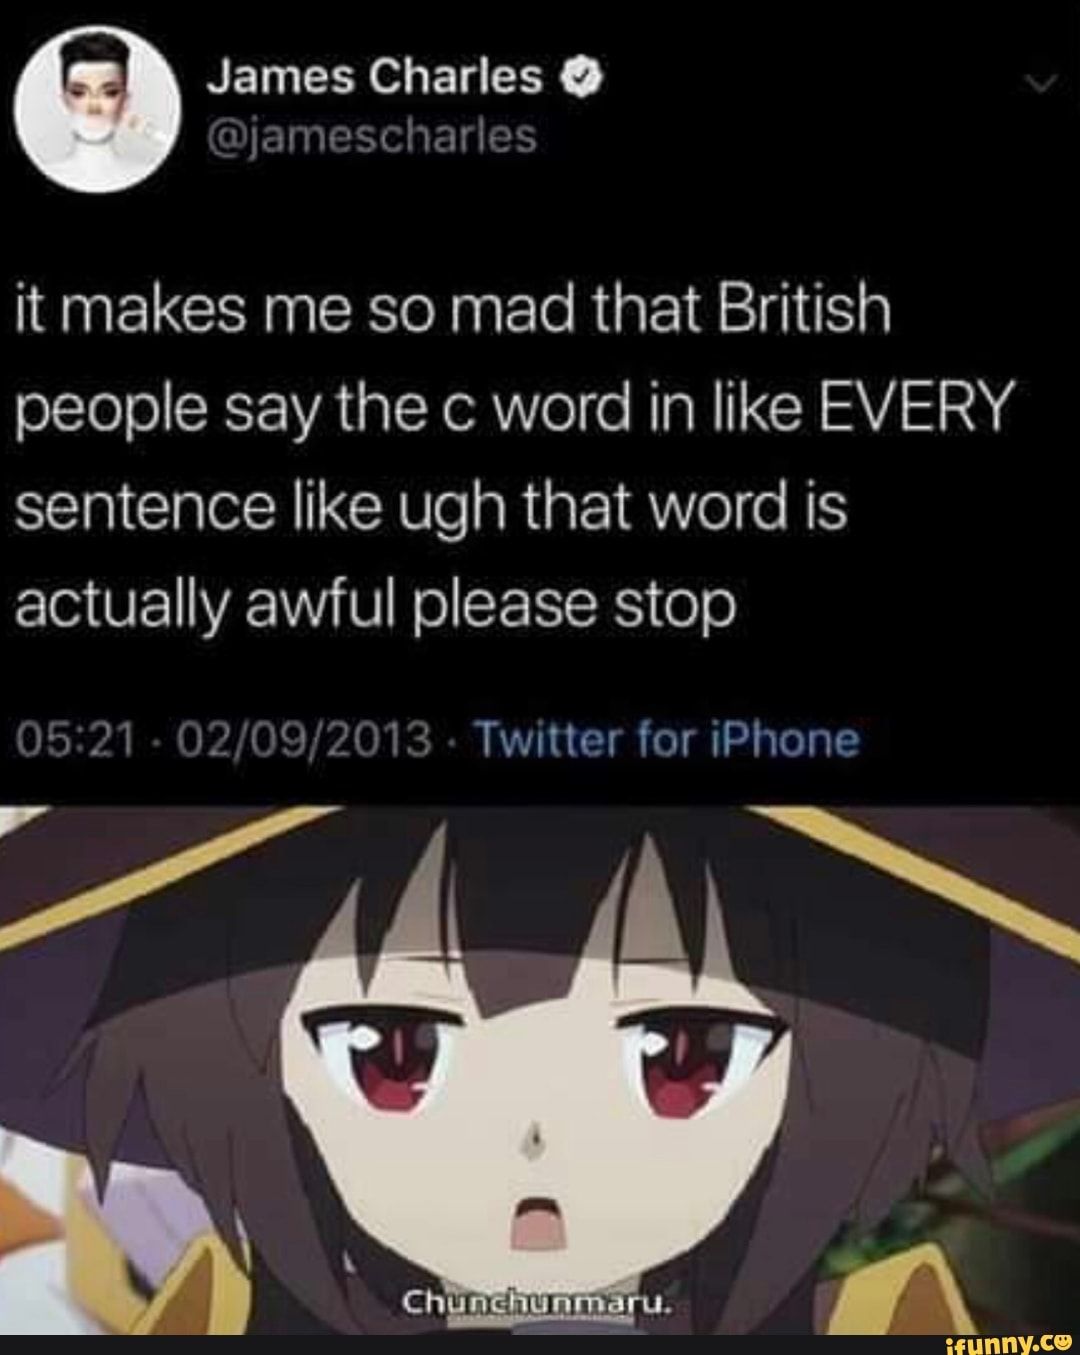 british people memes - James Charles it makes me so mad that British people say the c word in Every sentence ugh that word is actually awful please stop 02092013. Twitter for iPhone Chunchunmaru. ifunny.co